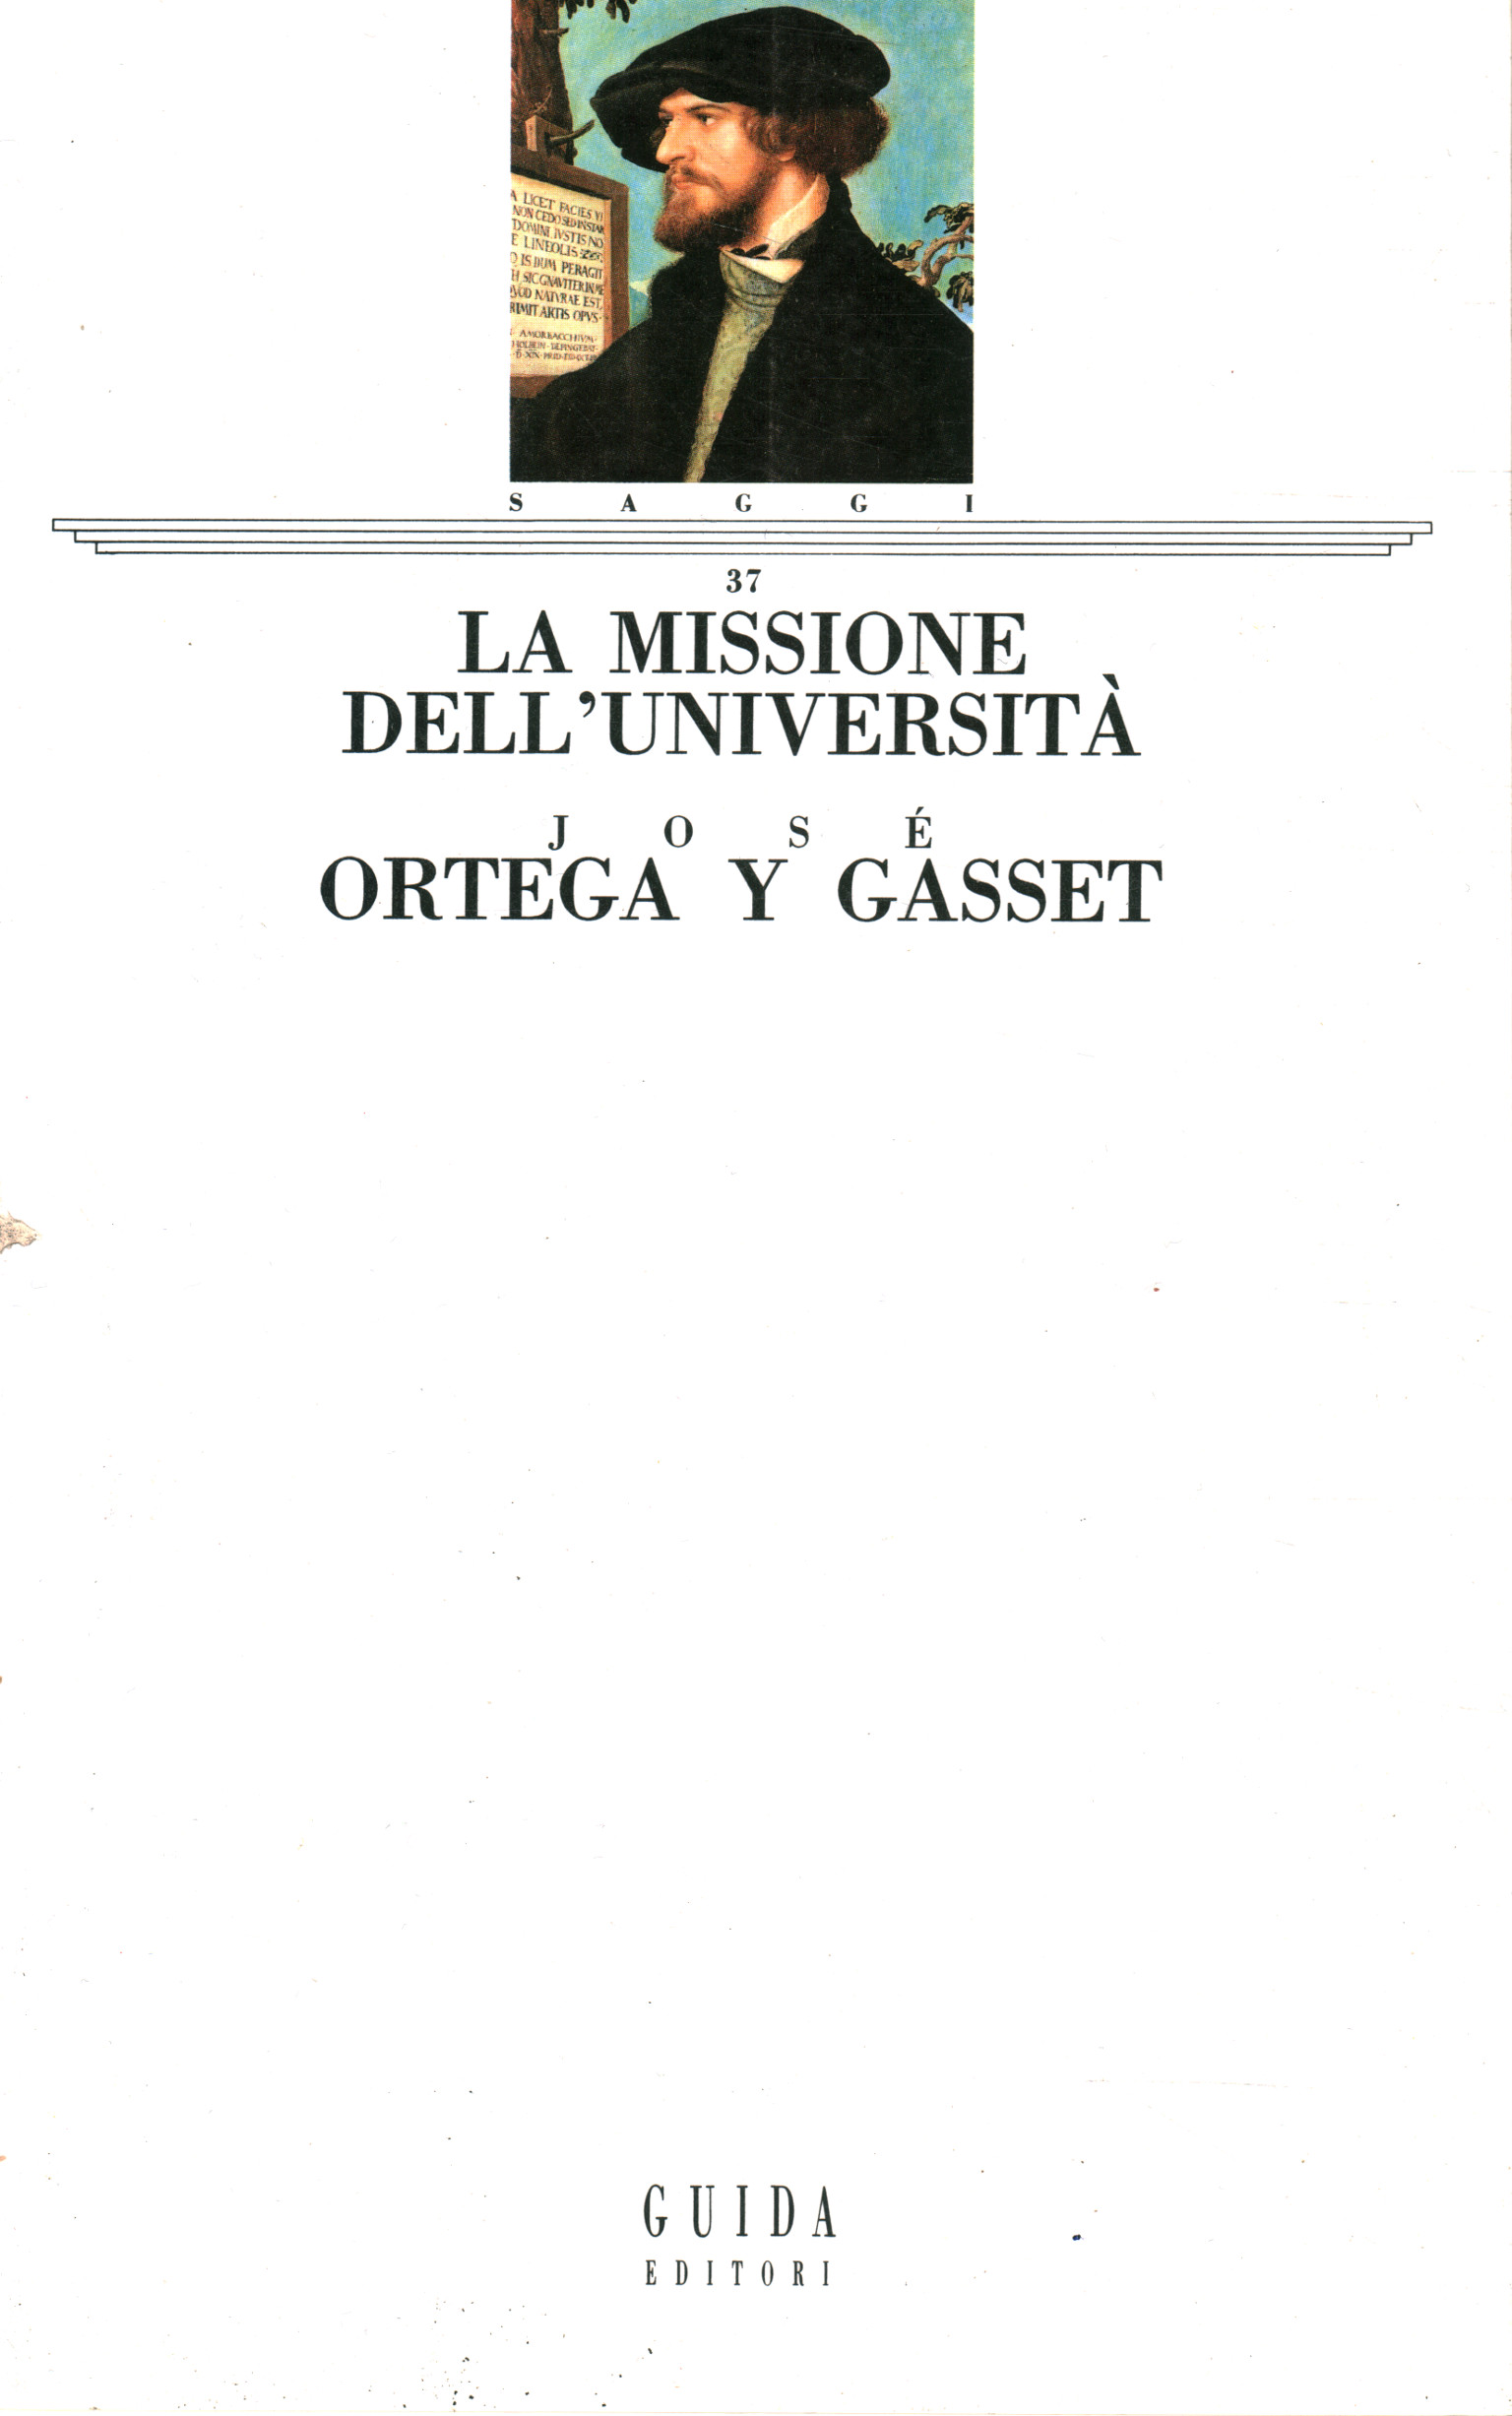 The mission of the University